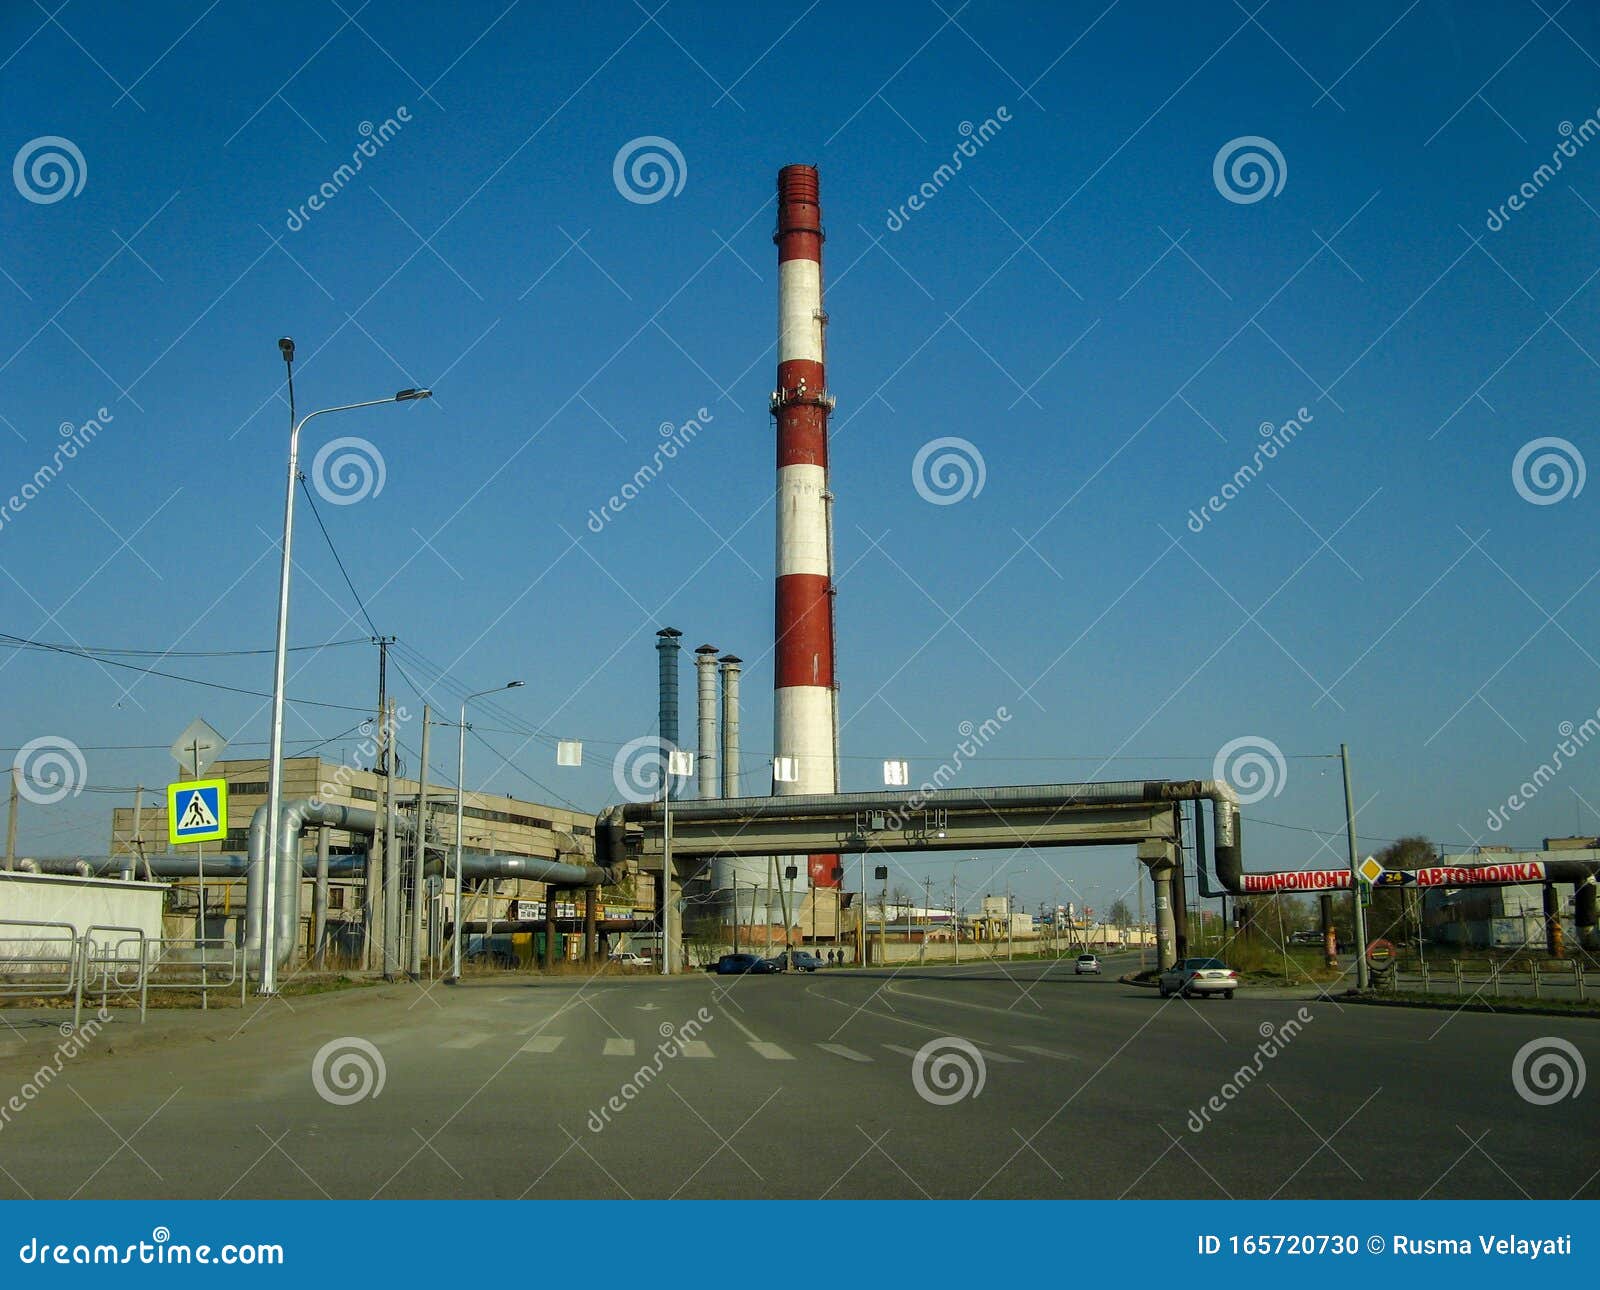 Chelyabinsk Central Hot Water Chimney. Russian Chimney with Blue Sky  Editorial Image - Image of ticket, carousel: 165720730